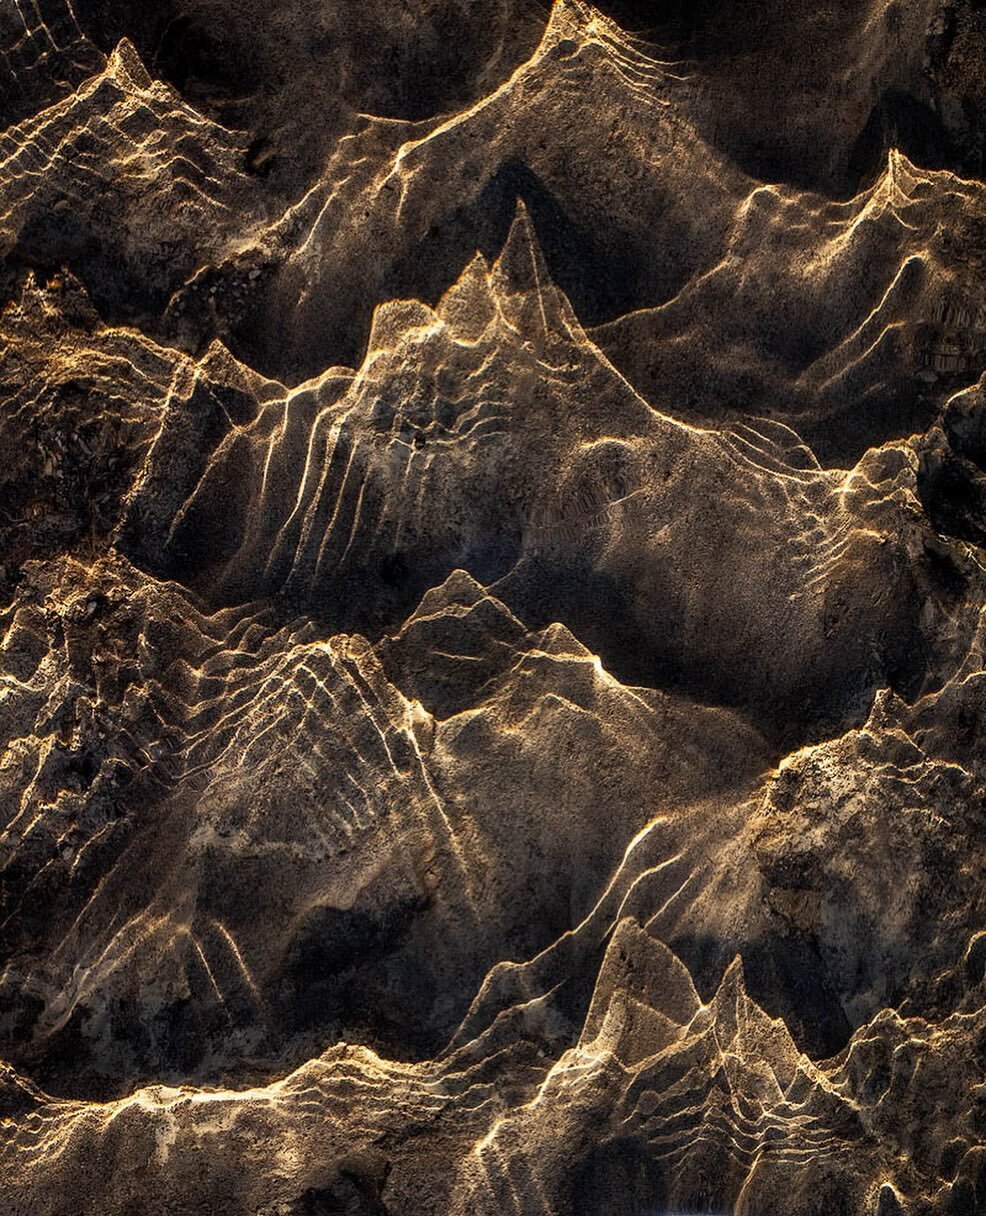 Mountains made of water in Death Valley National Park.